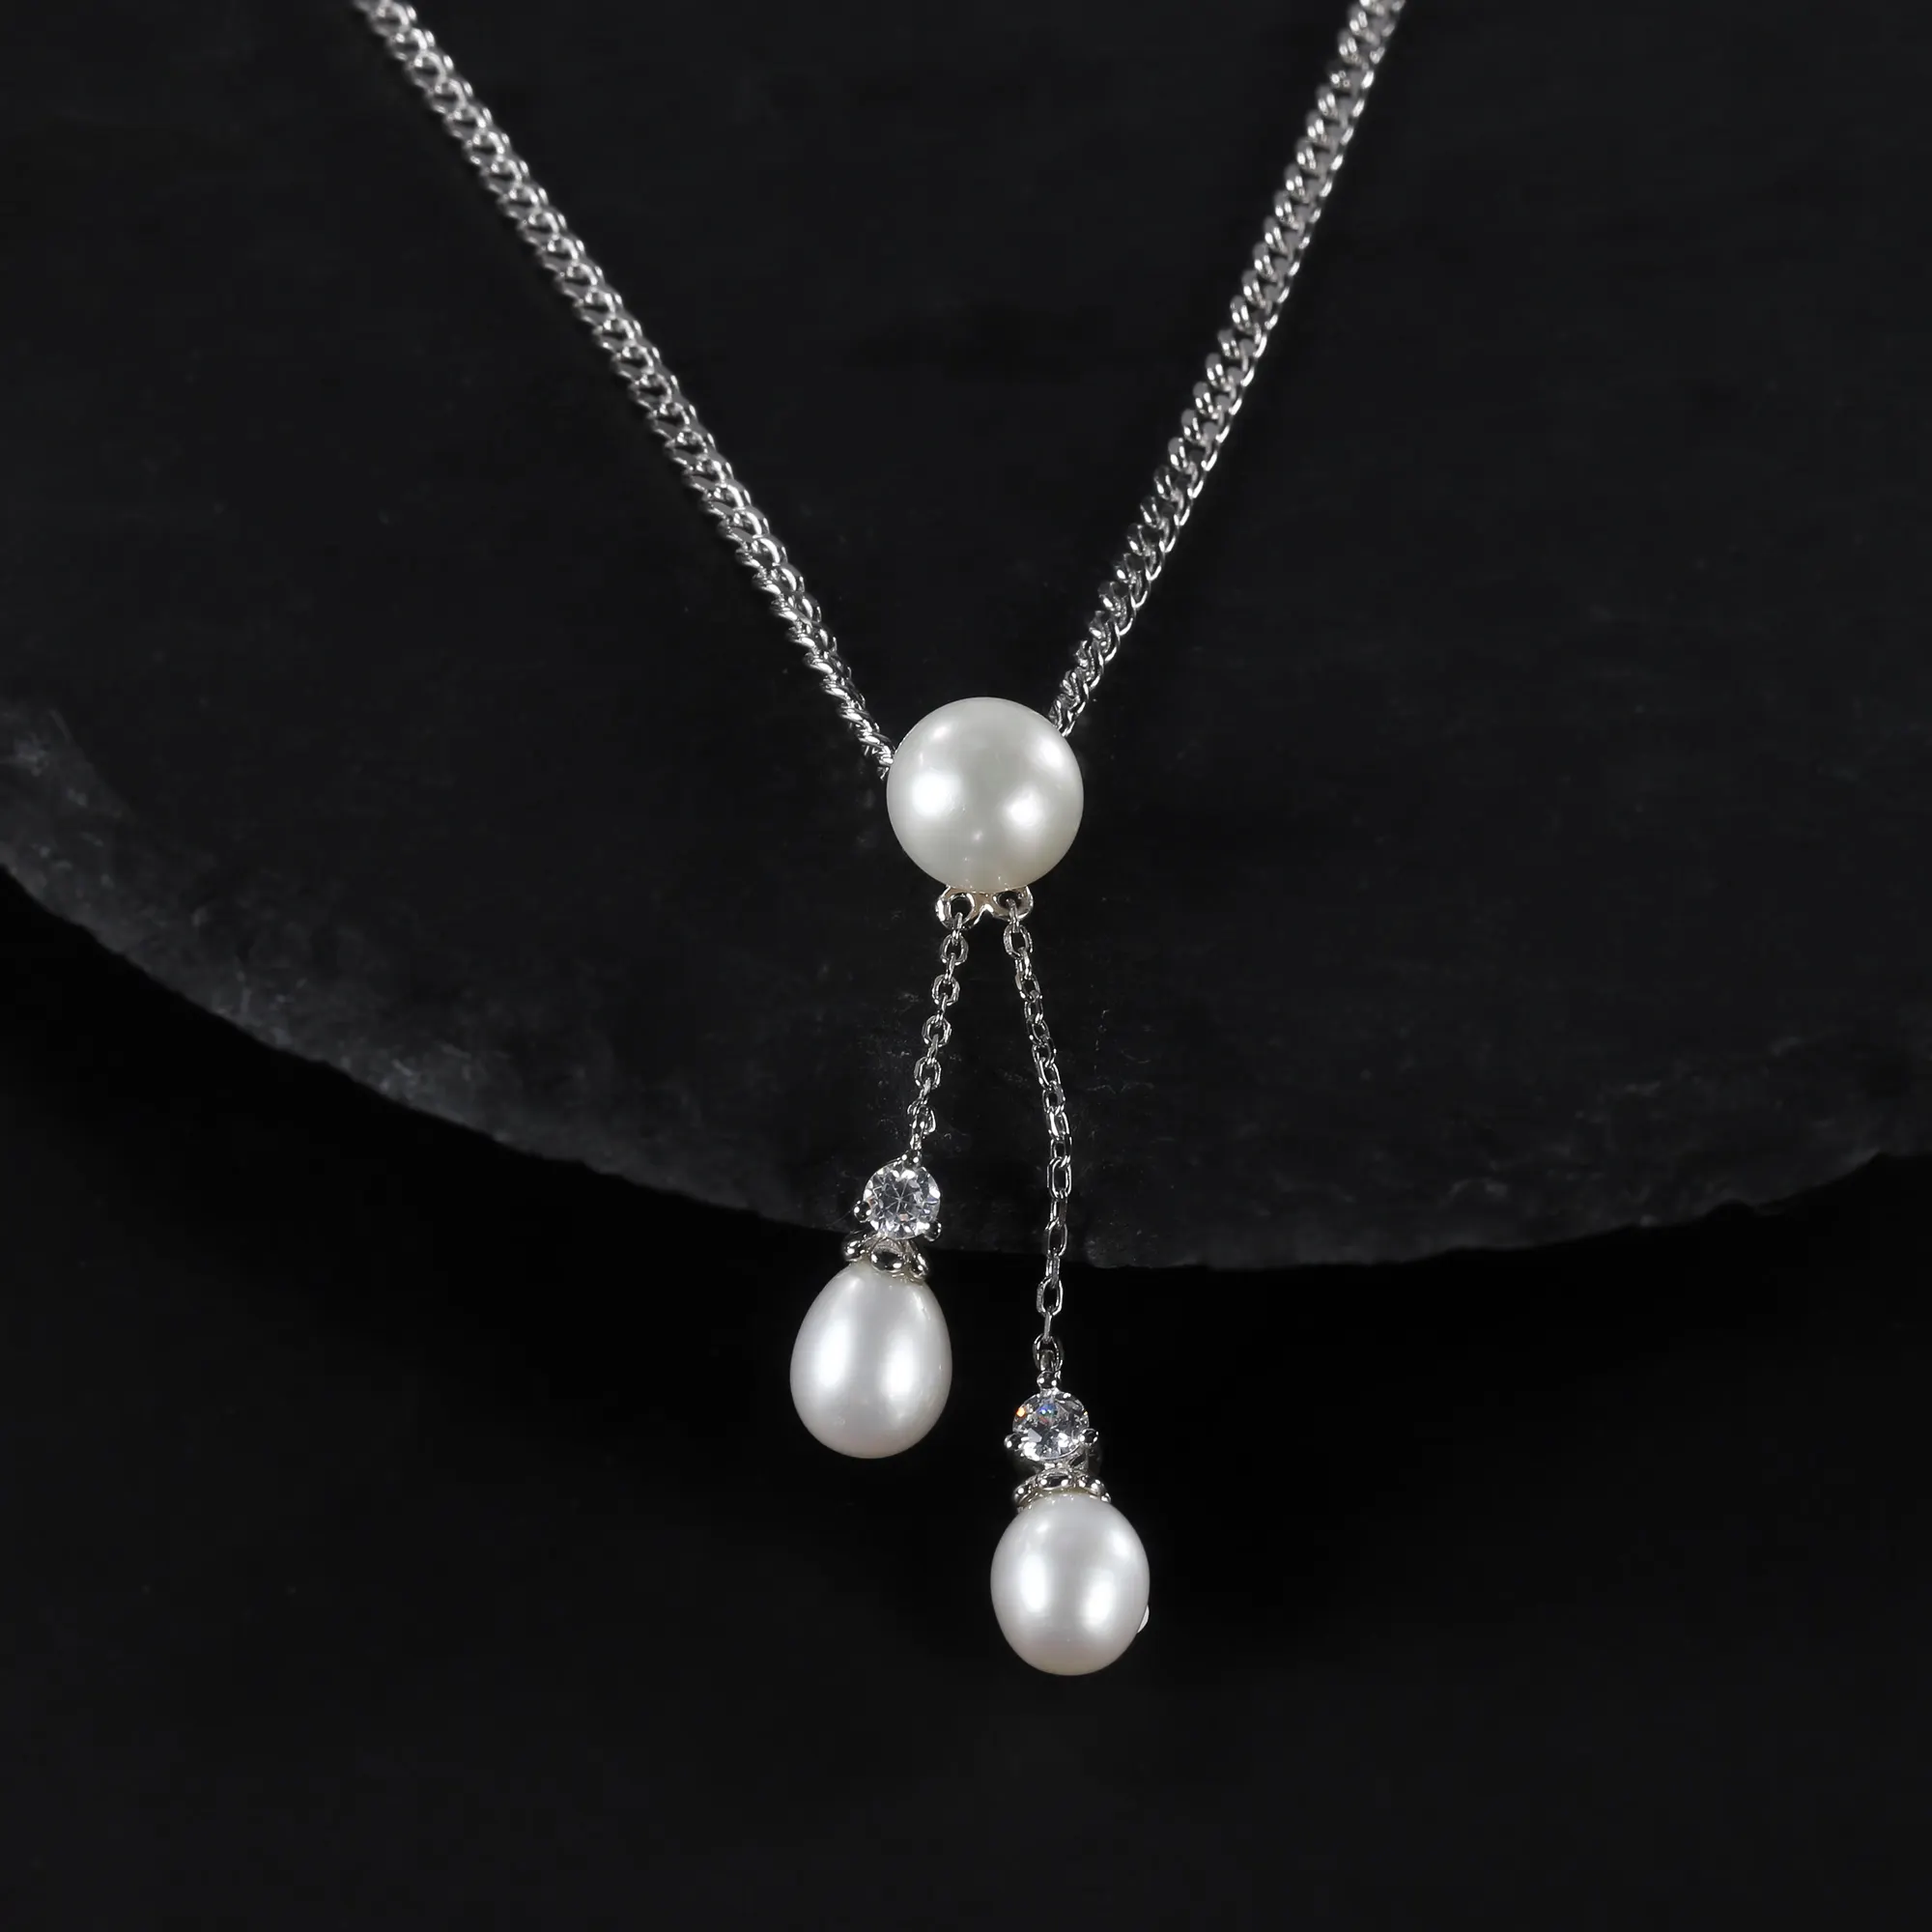 9mm pearl necklace